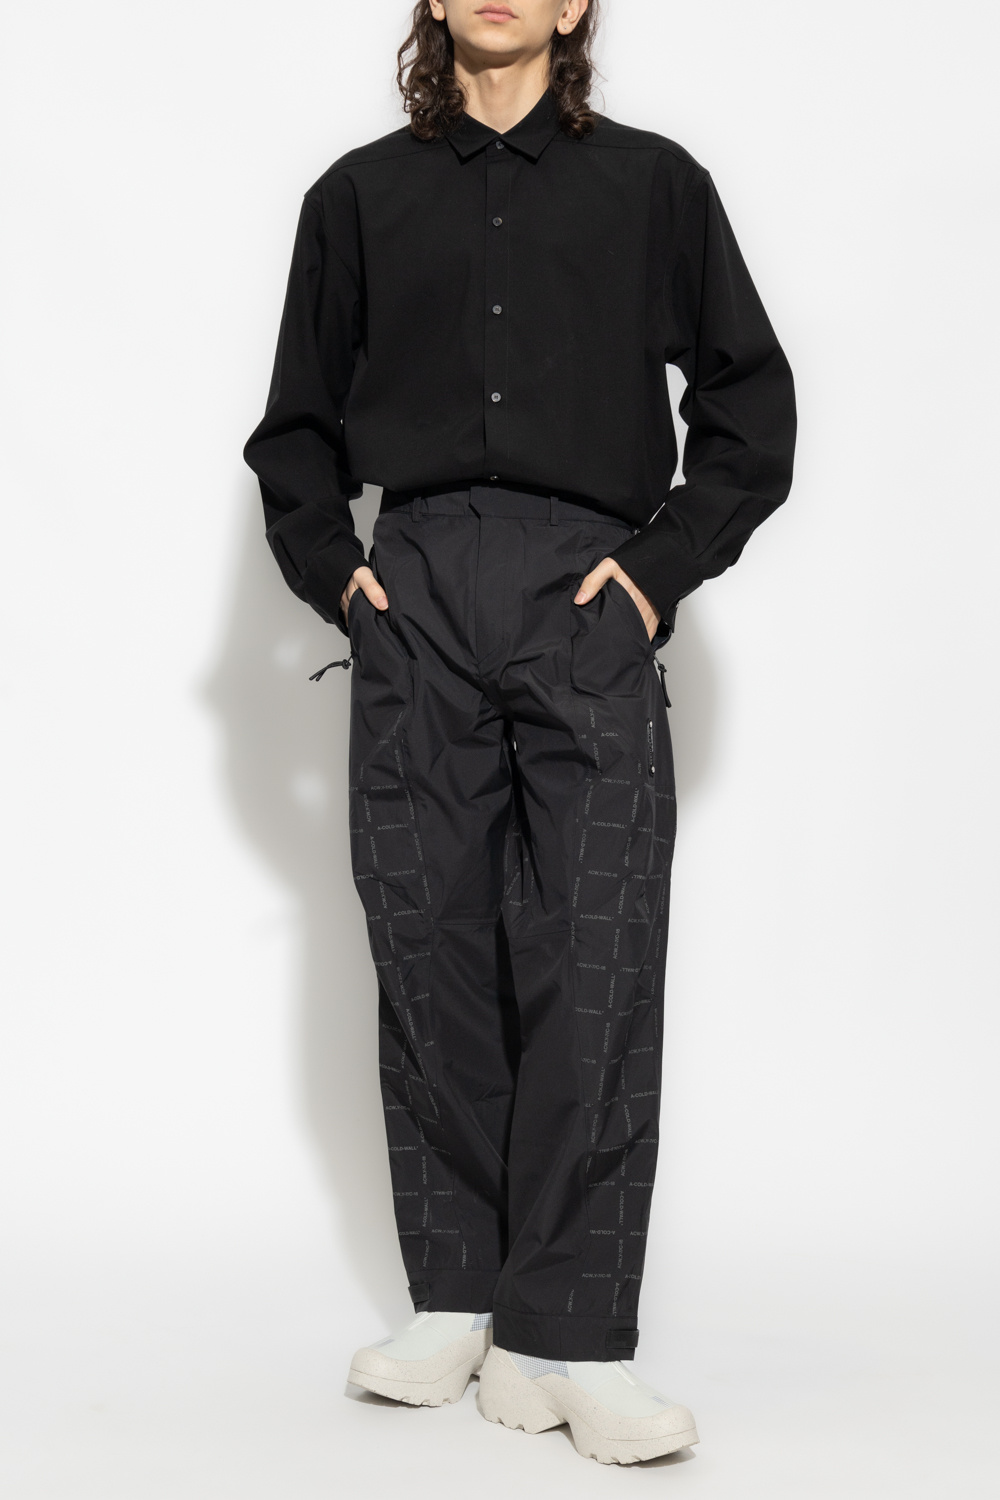 A-COLD-WALL* Trousers with logo